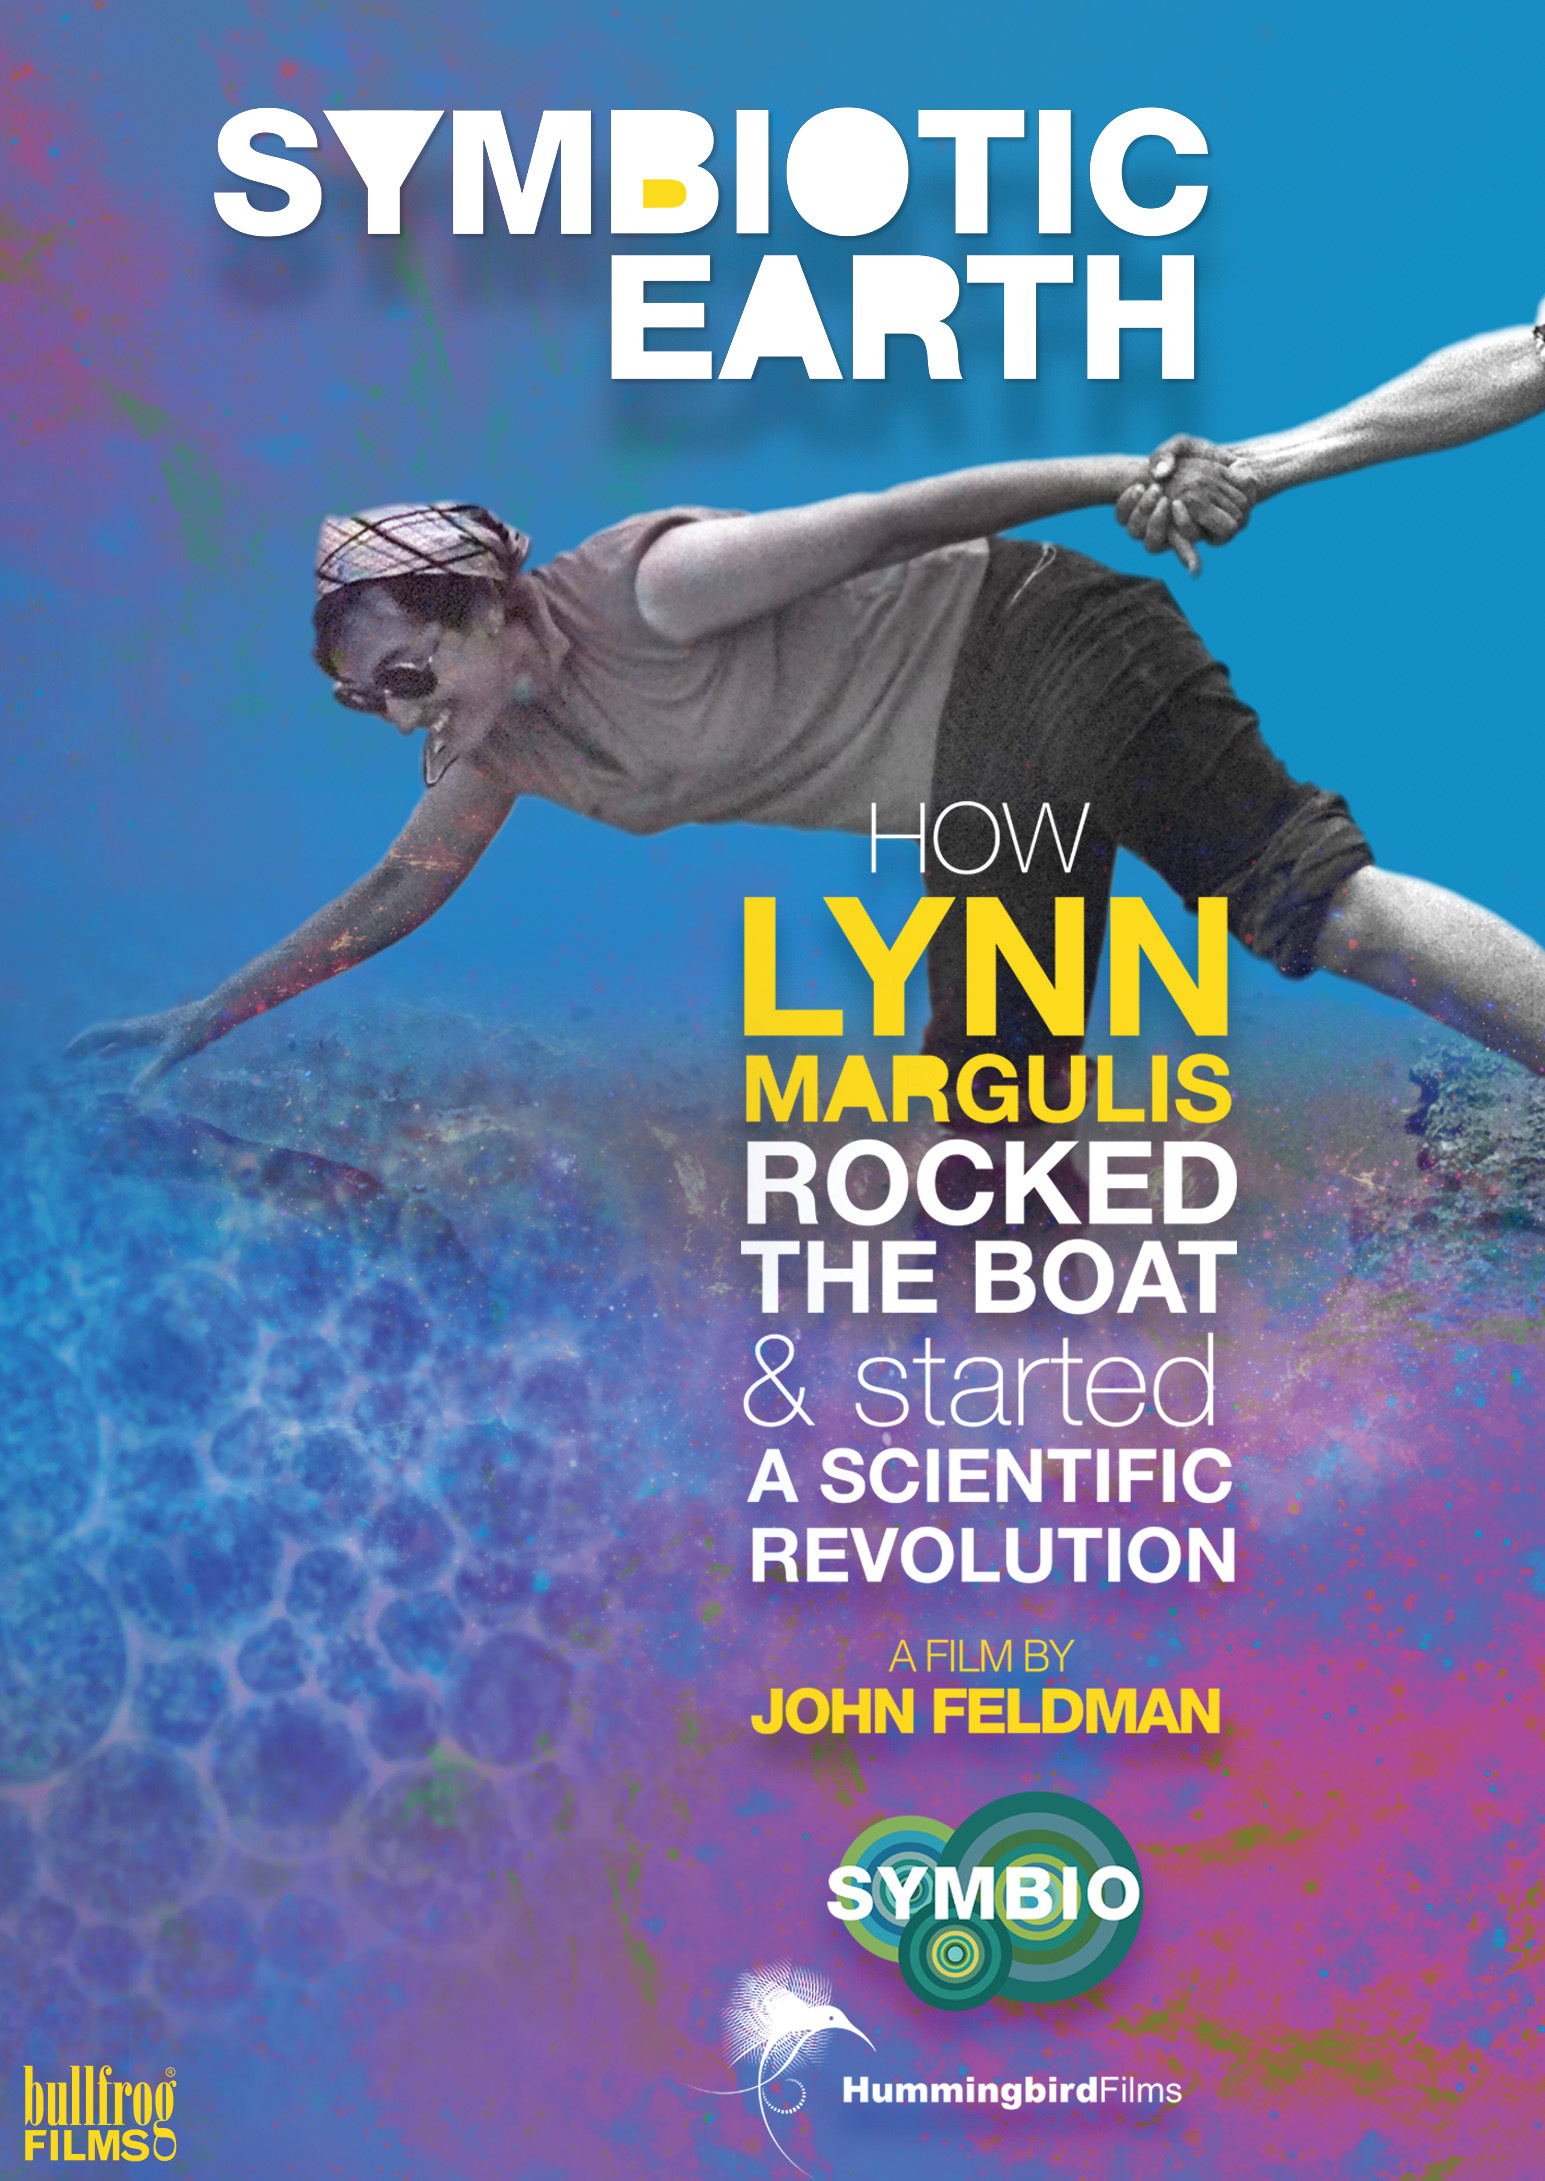 The poster of the film Symbiotic Earth shows Lynn Margulis with one hand and one leg in the water, with the other leg on the ground and with the other hand holding a strange hand